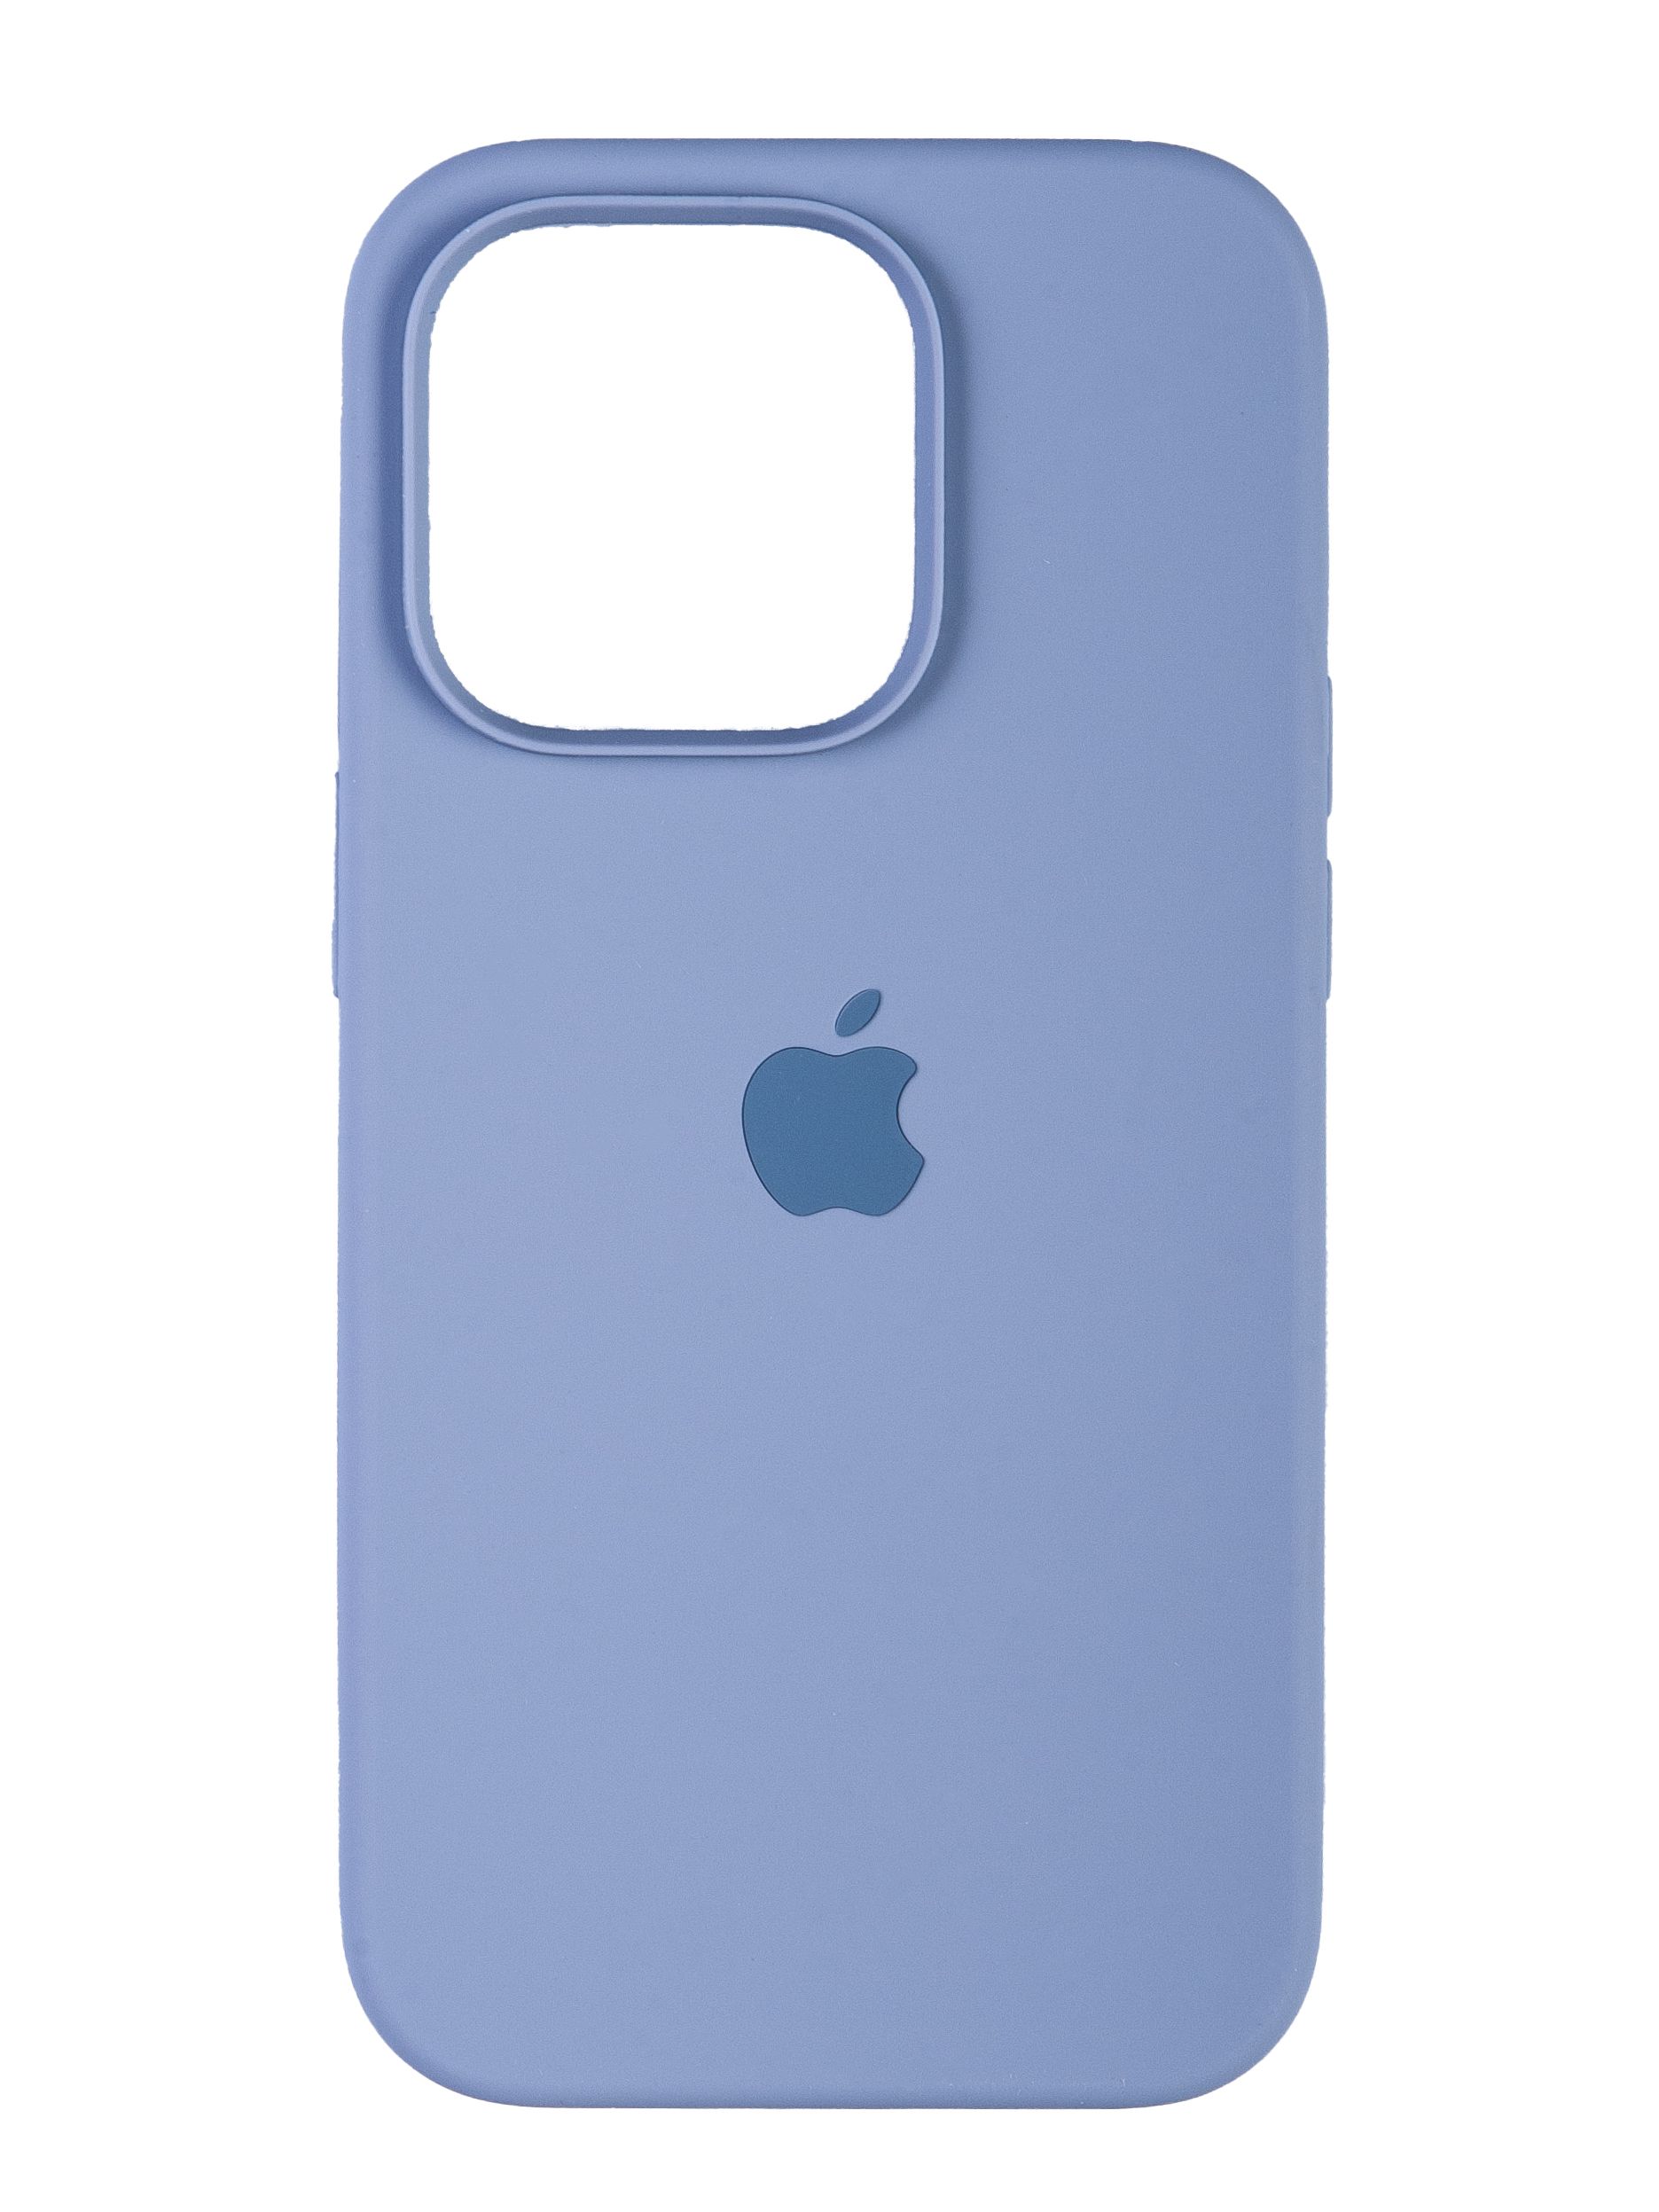 Sleek and Sophisticated iPhone 14 Pro Cases for the Modern Adult